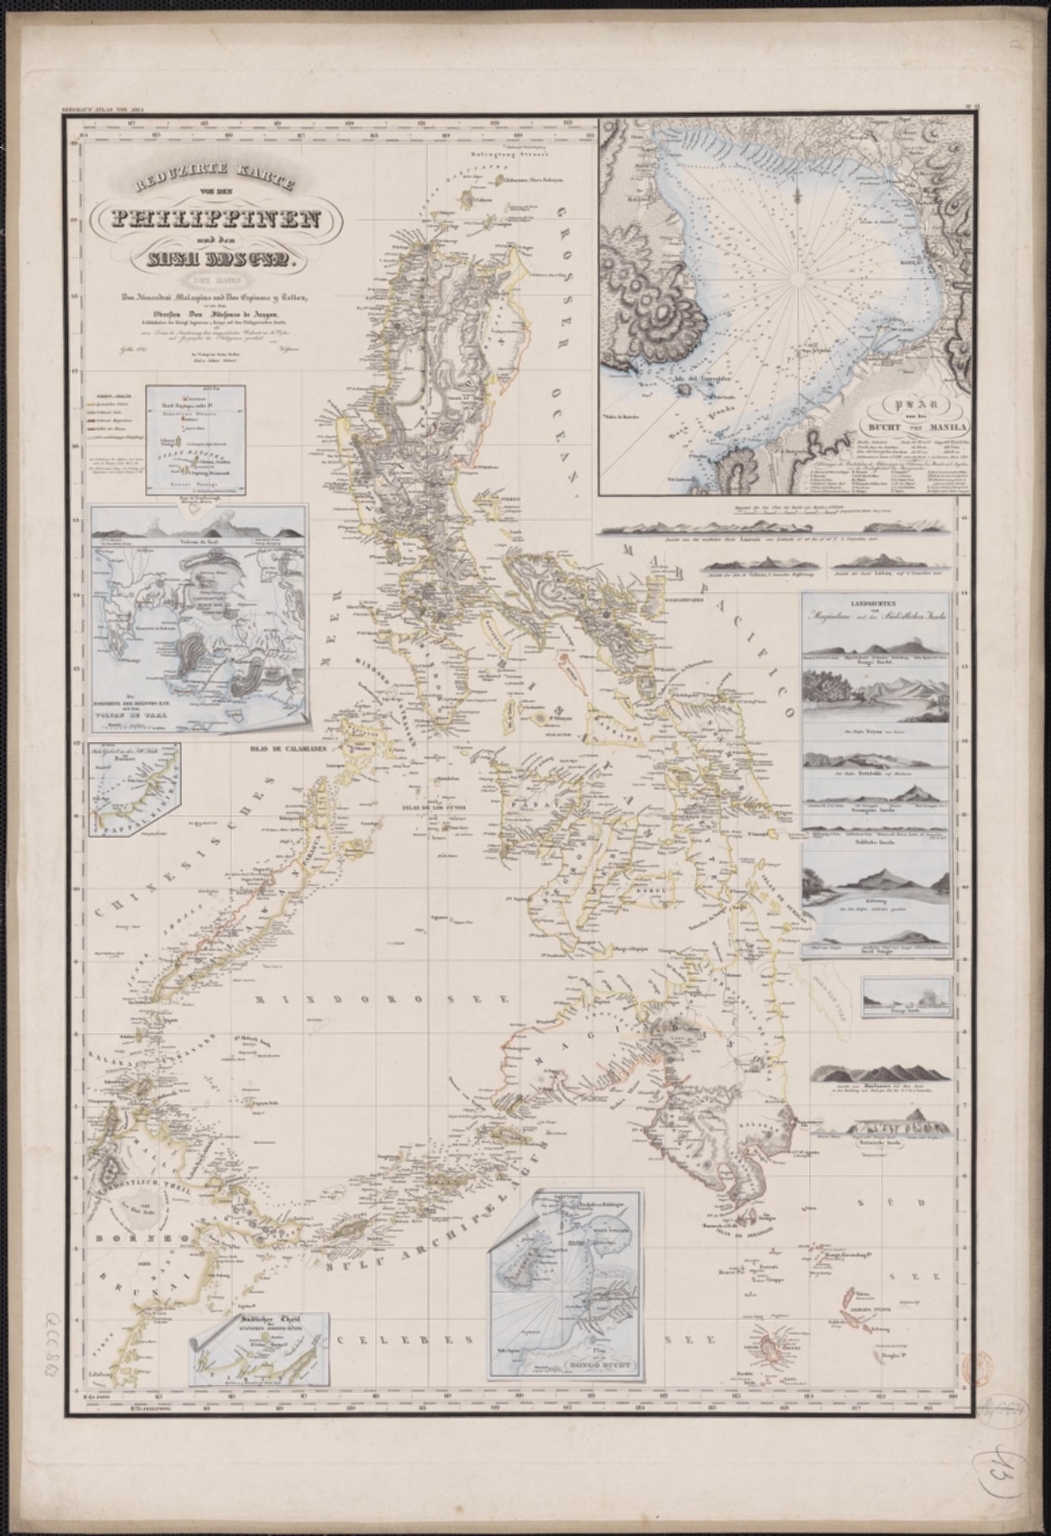 Reduced map of the Philippines and Susu Islands.